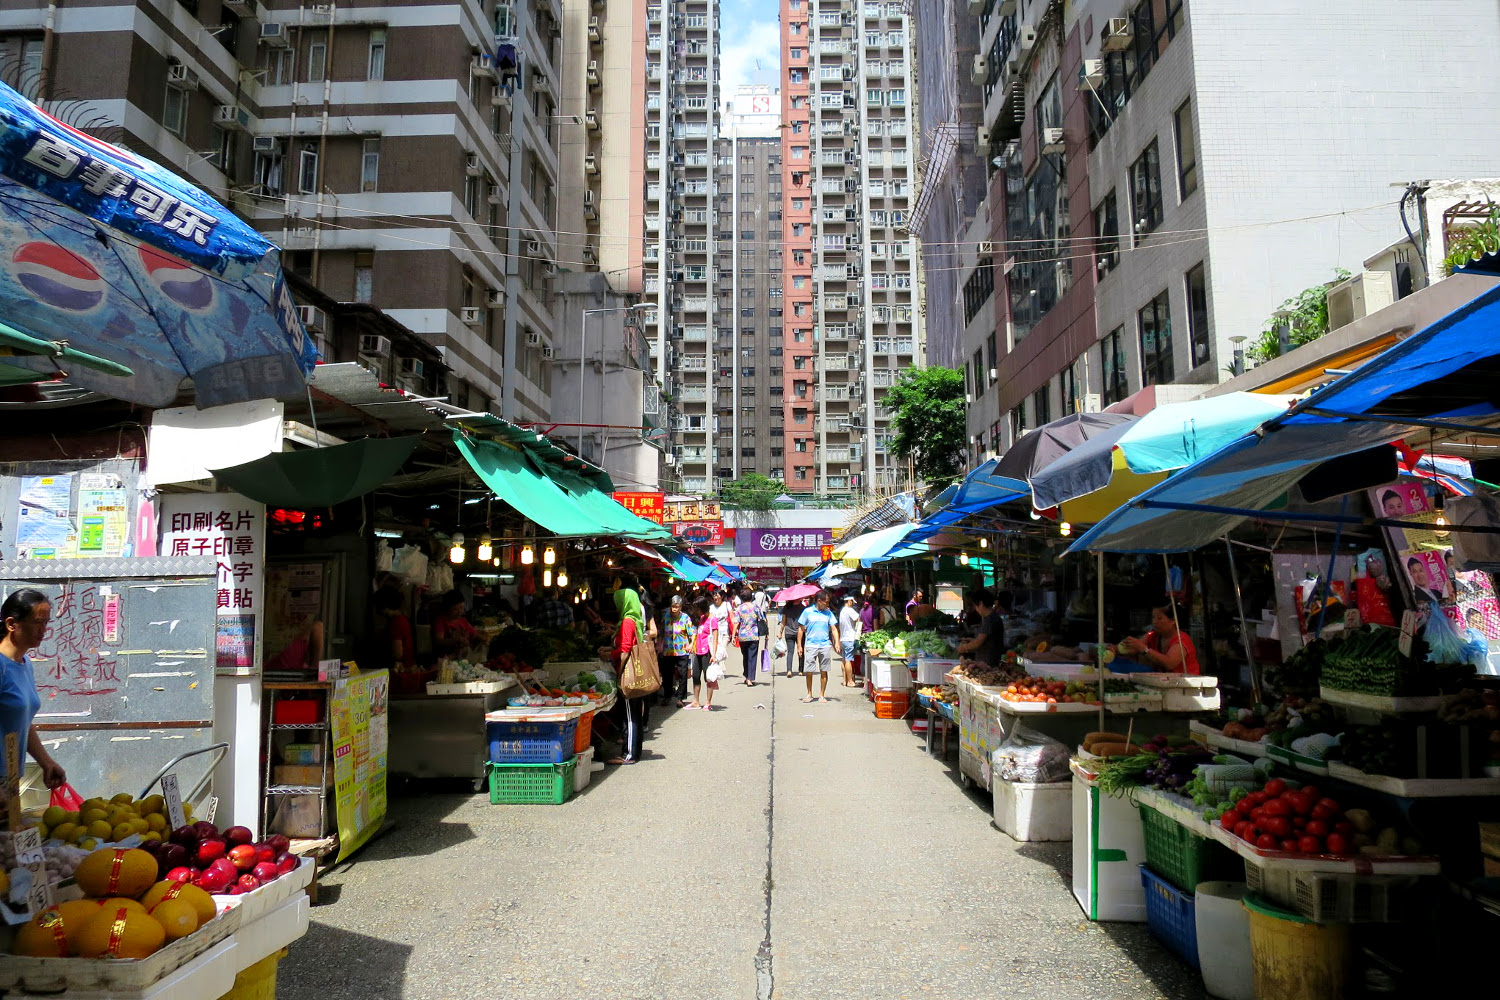 The markets of Mong Kong are perfect for browsing. Image by Megan Eaves / Lonely Planet